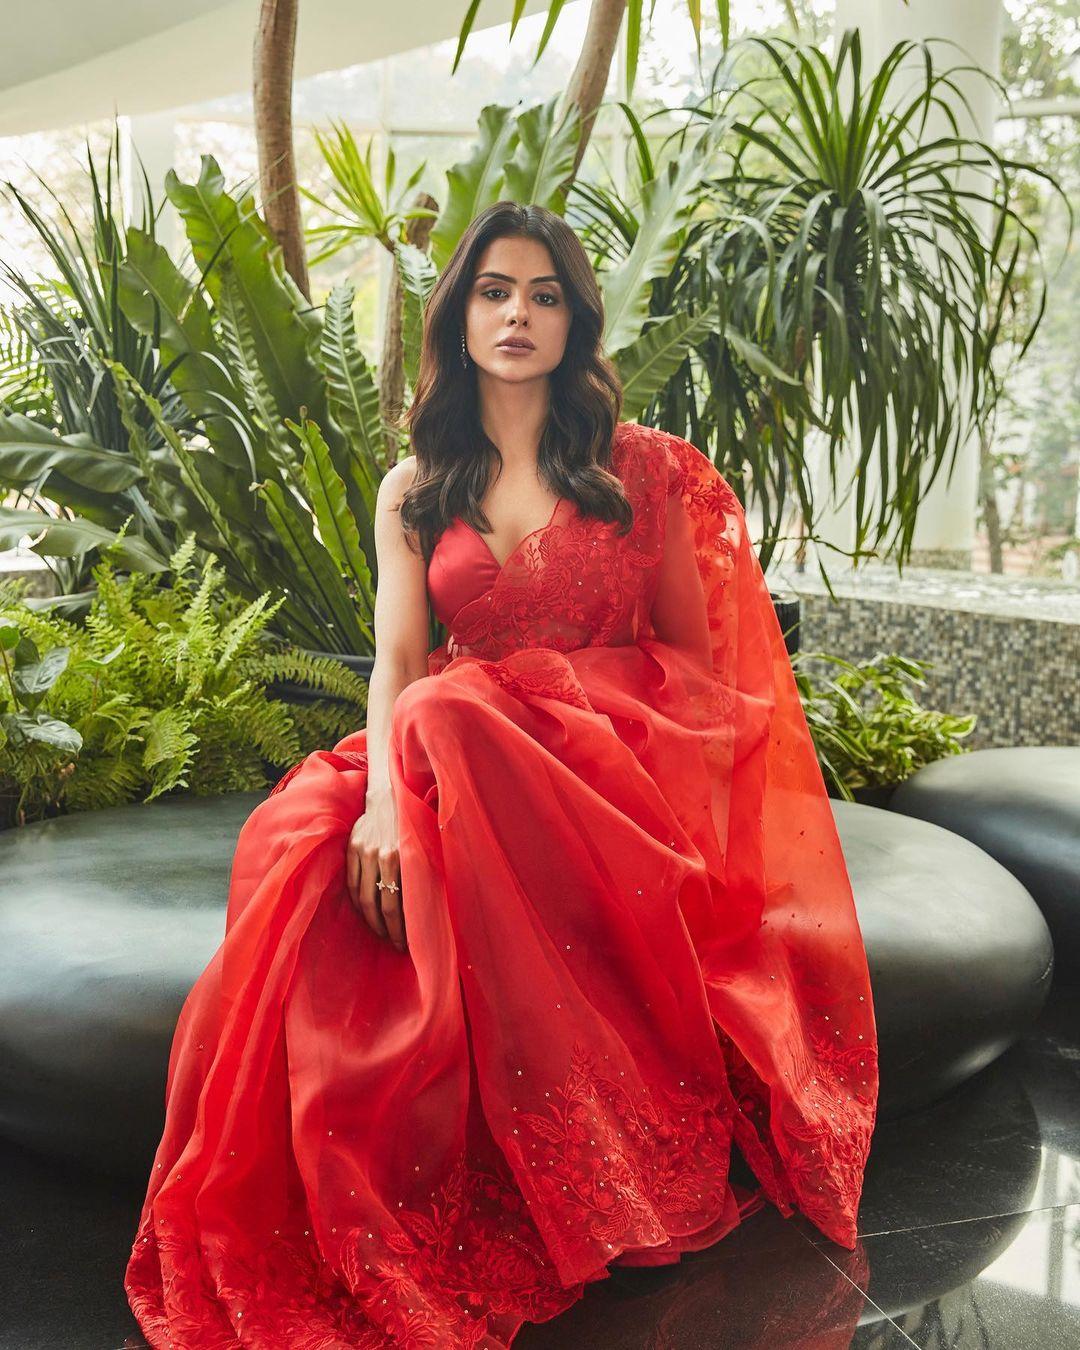 In this look, Priyanka wore a sheer red saree with intricate designs on it. The actress left her hair open and put on nude makeup to maintain simplicity. If you are taking inspiration from Priyanka’s this look, be ready to get a lot of love from your family members